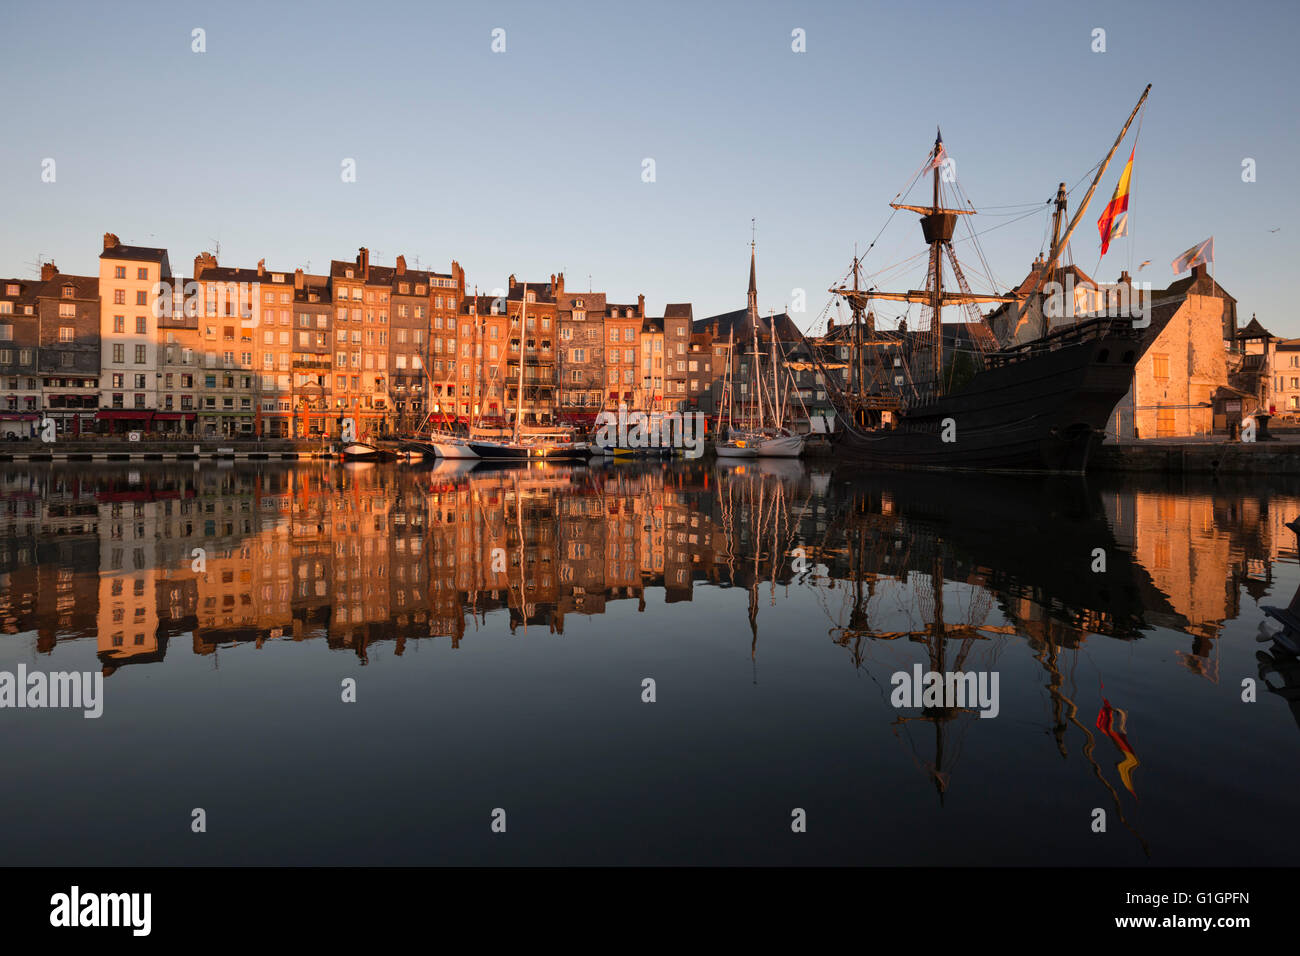 Vieux Bassin looking to Saint Catherine Quay with replica galleon at dawn, Honfleur, Normandy, France, Europe Stock Photo